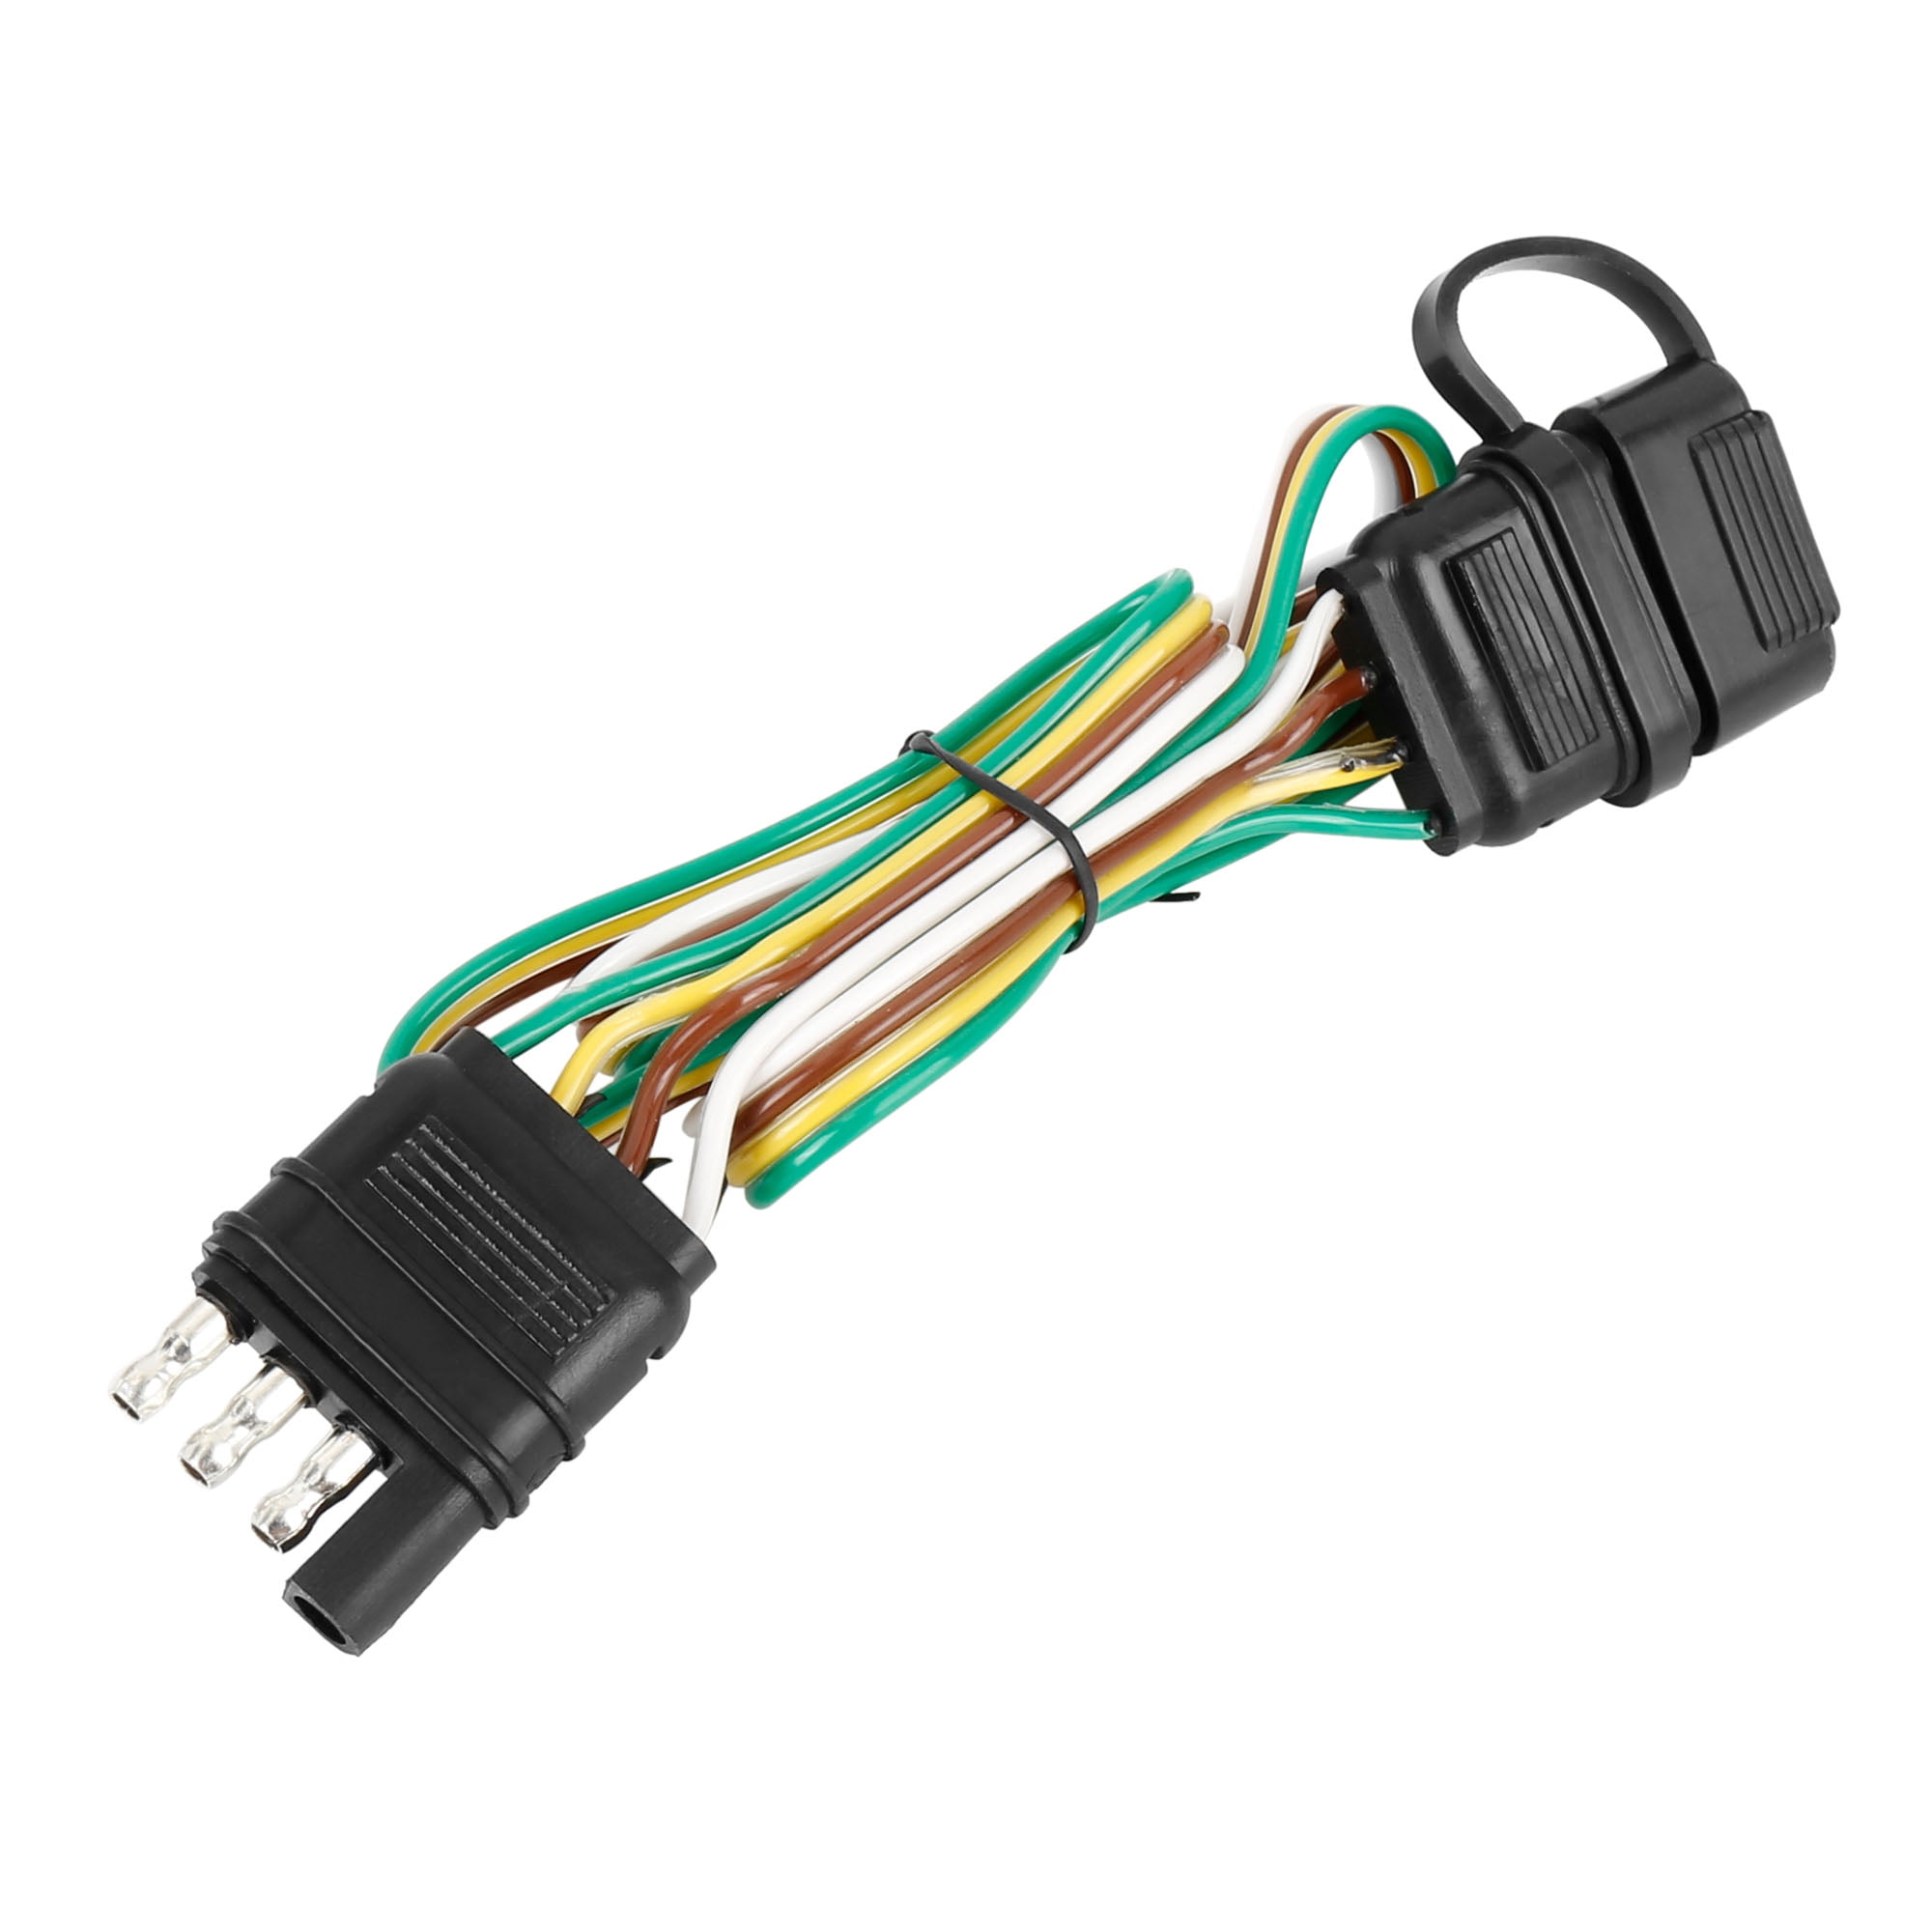 Autoly 4-Way Flat Trailer Wire Plug Connector with 9 Inches Cable Length Universal Wiring Connector 